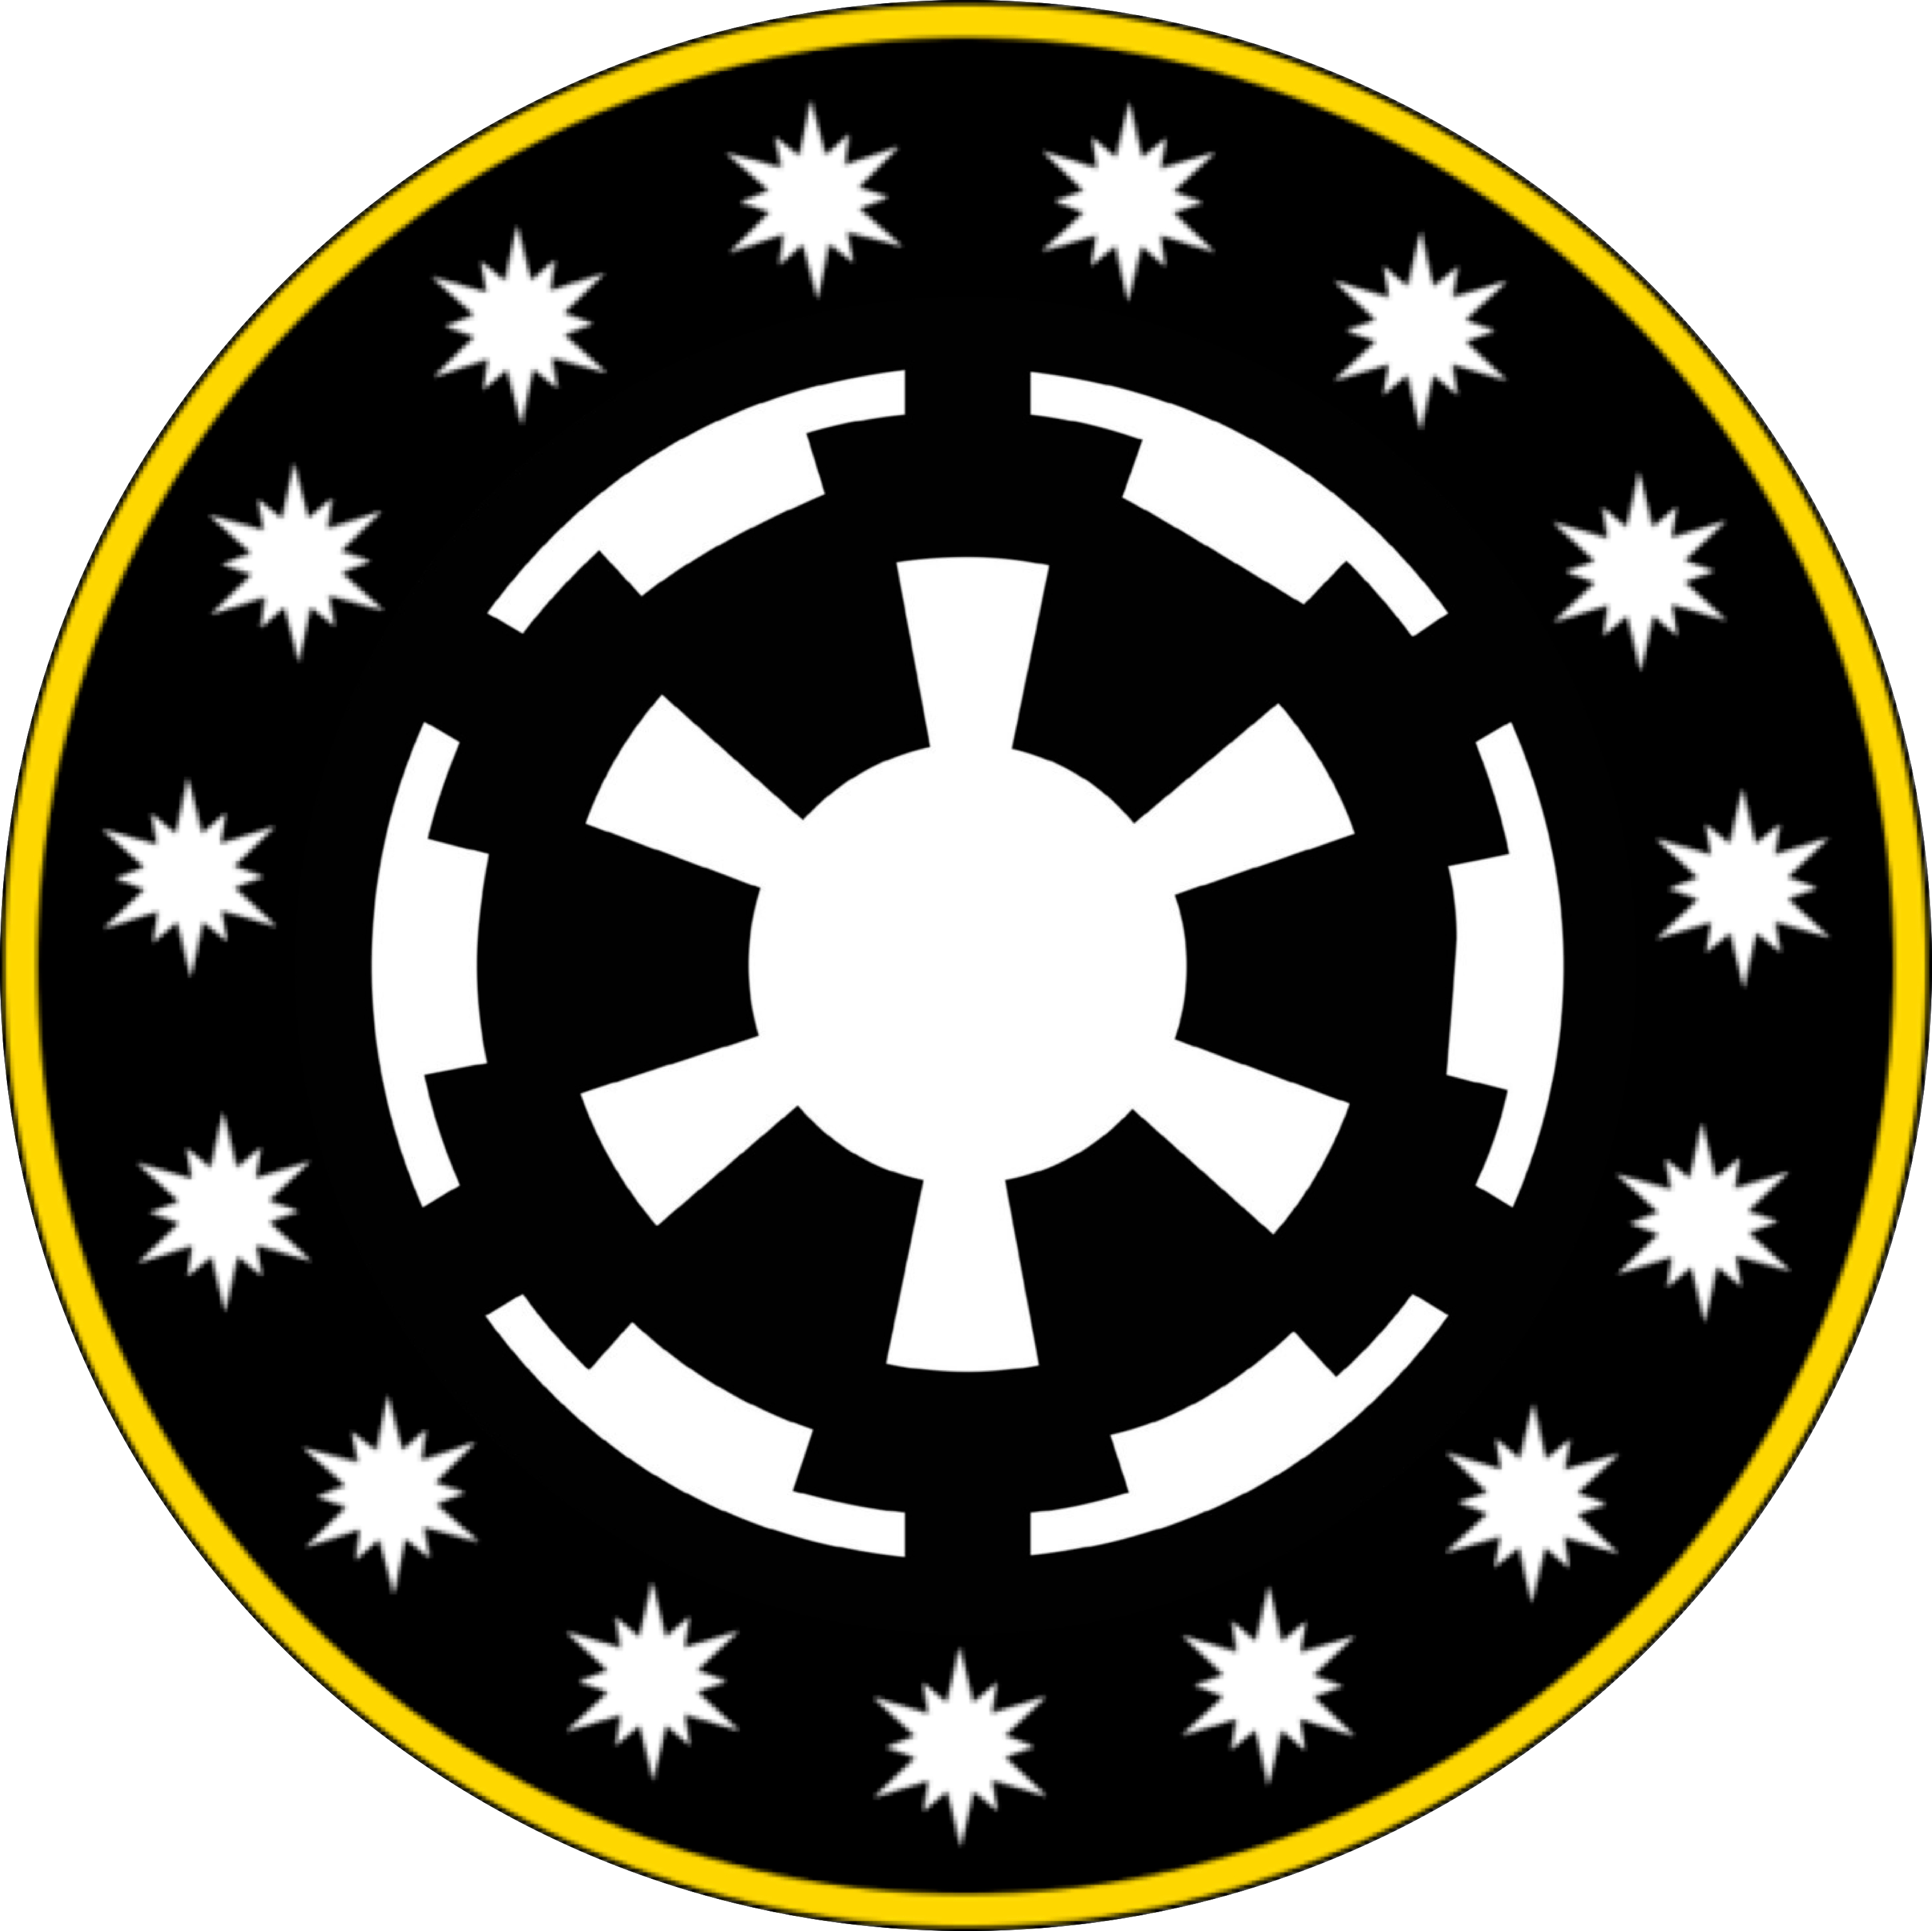 A Circular Design With White Stars And A Yellow Border